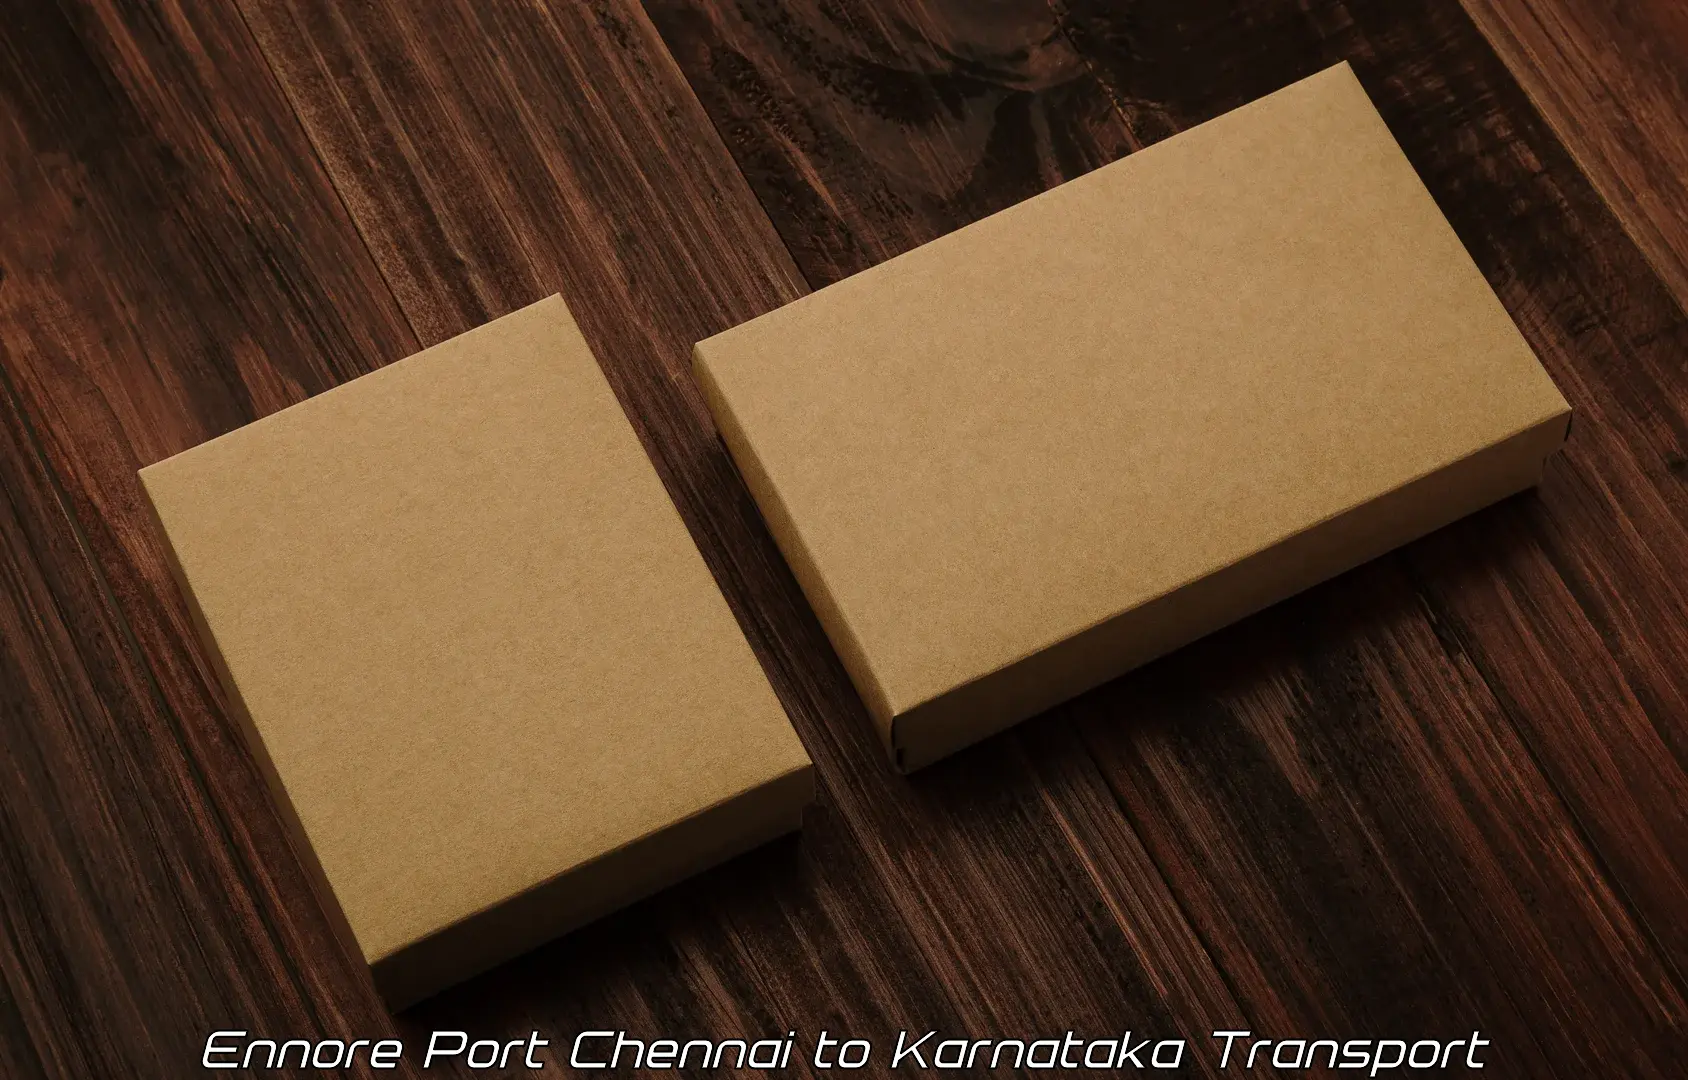 Commercial transport service Ennore Port Chennai to Hukkeri